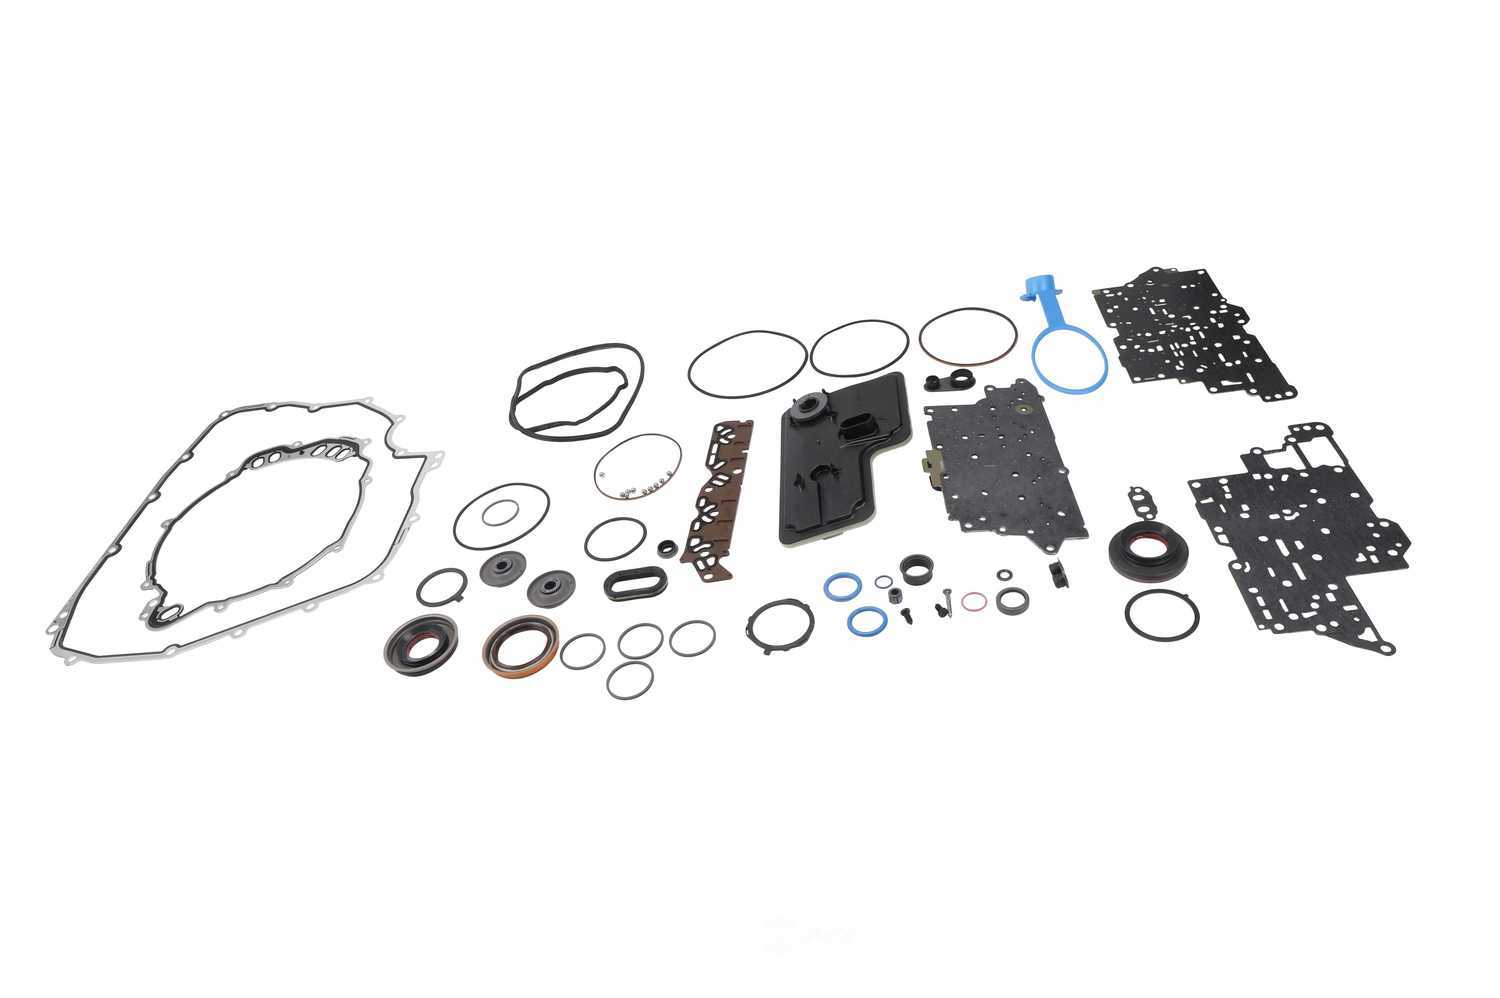 GM GENUINE PARTS - Automatic Transmission Seal Kit - GMP 24276289